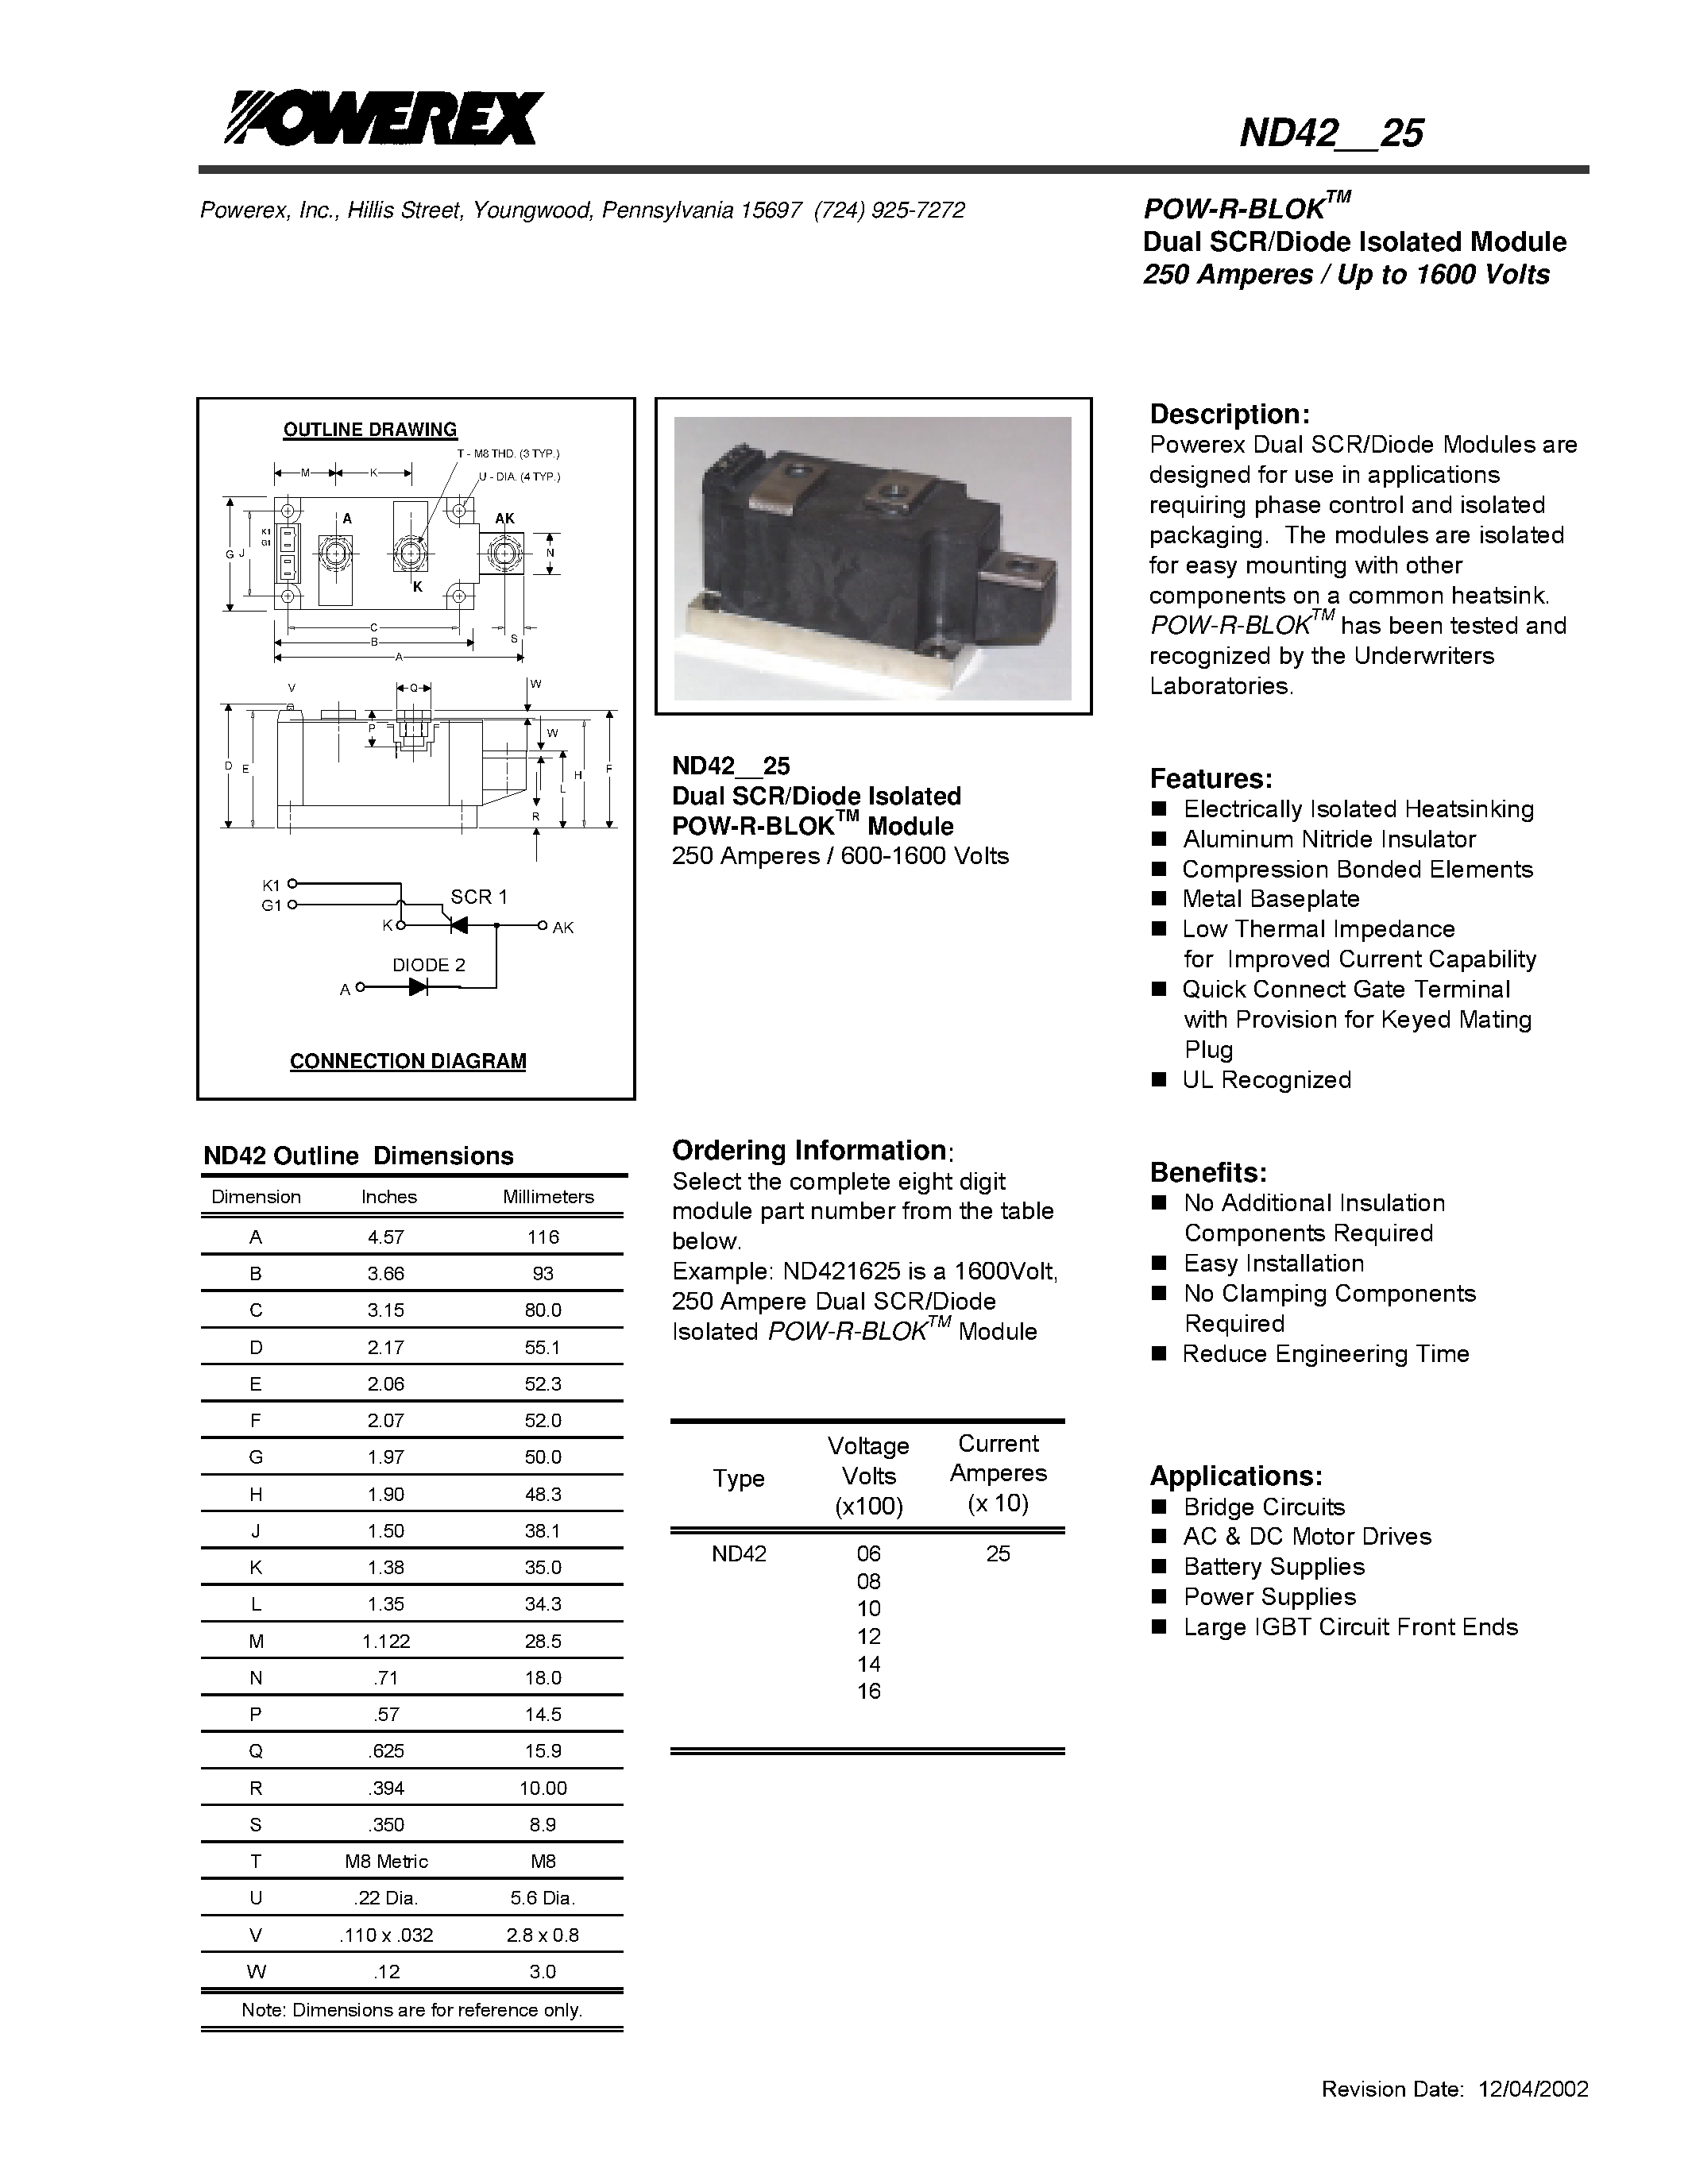 Datasheet ND4225 - POW-R-BLOK Dual SCR/Diode Isolated Module (250 Amperes / Up to 1600 Volts) page 1